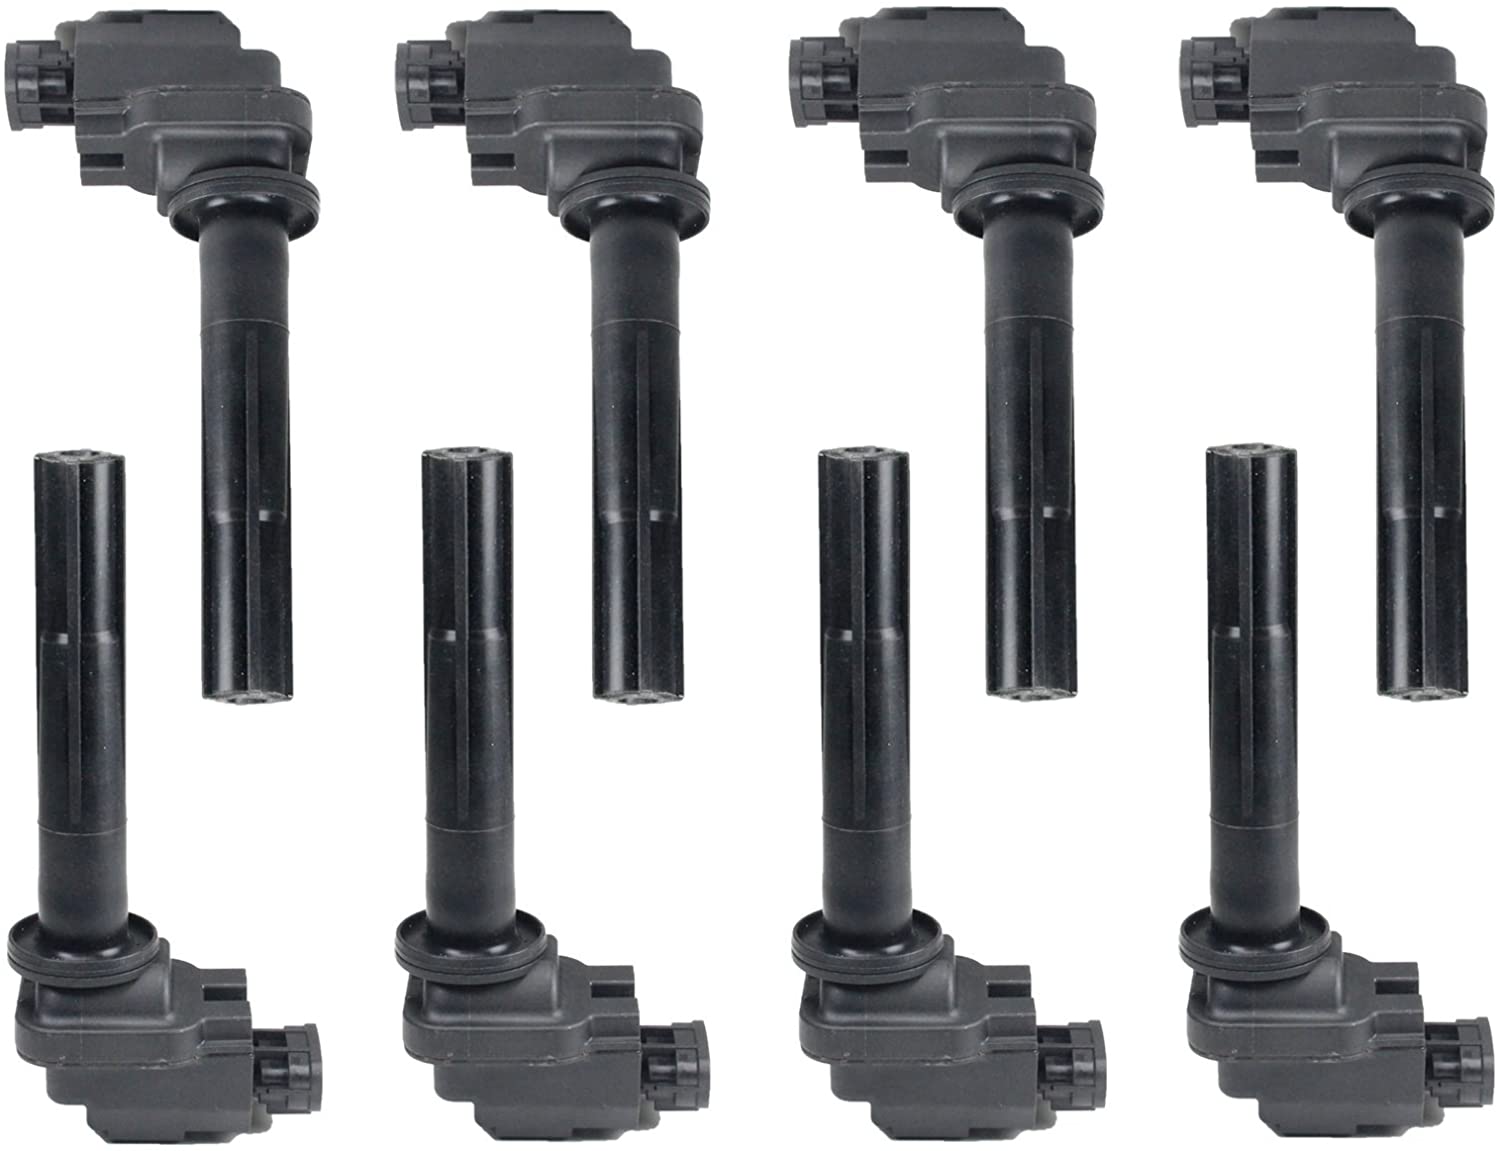 ENA Pack of 8 Ignition Coils Compatible with Lexus LS400 SC400 GS400 4.0L V8 Compatible with C1163 UF229 (8)